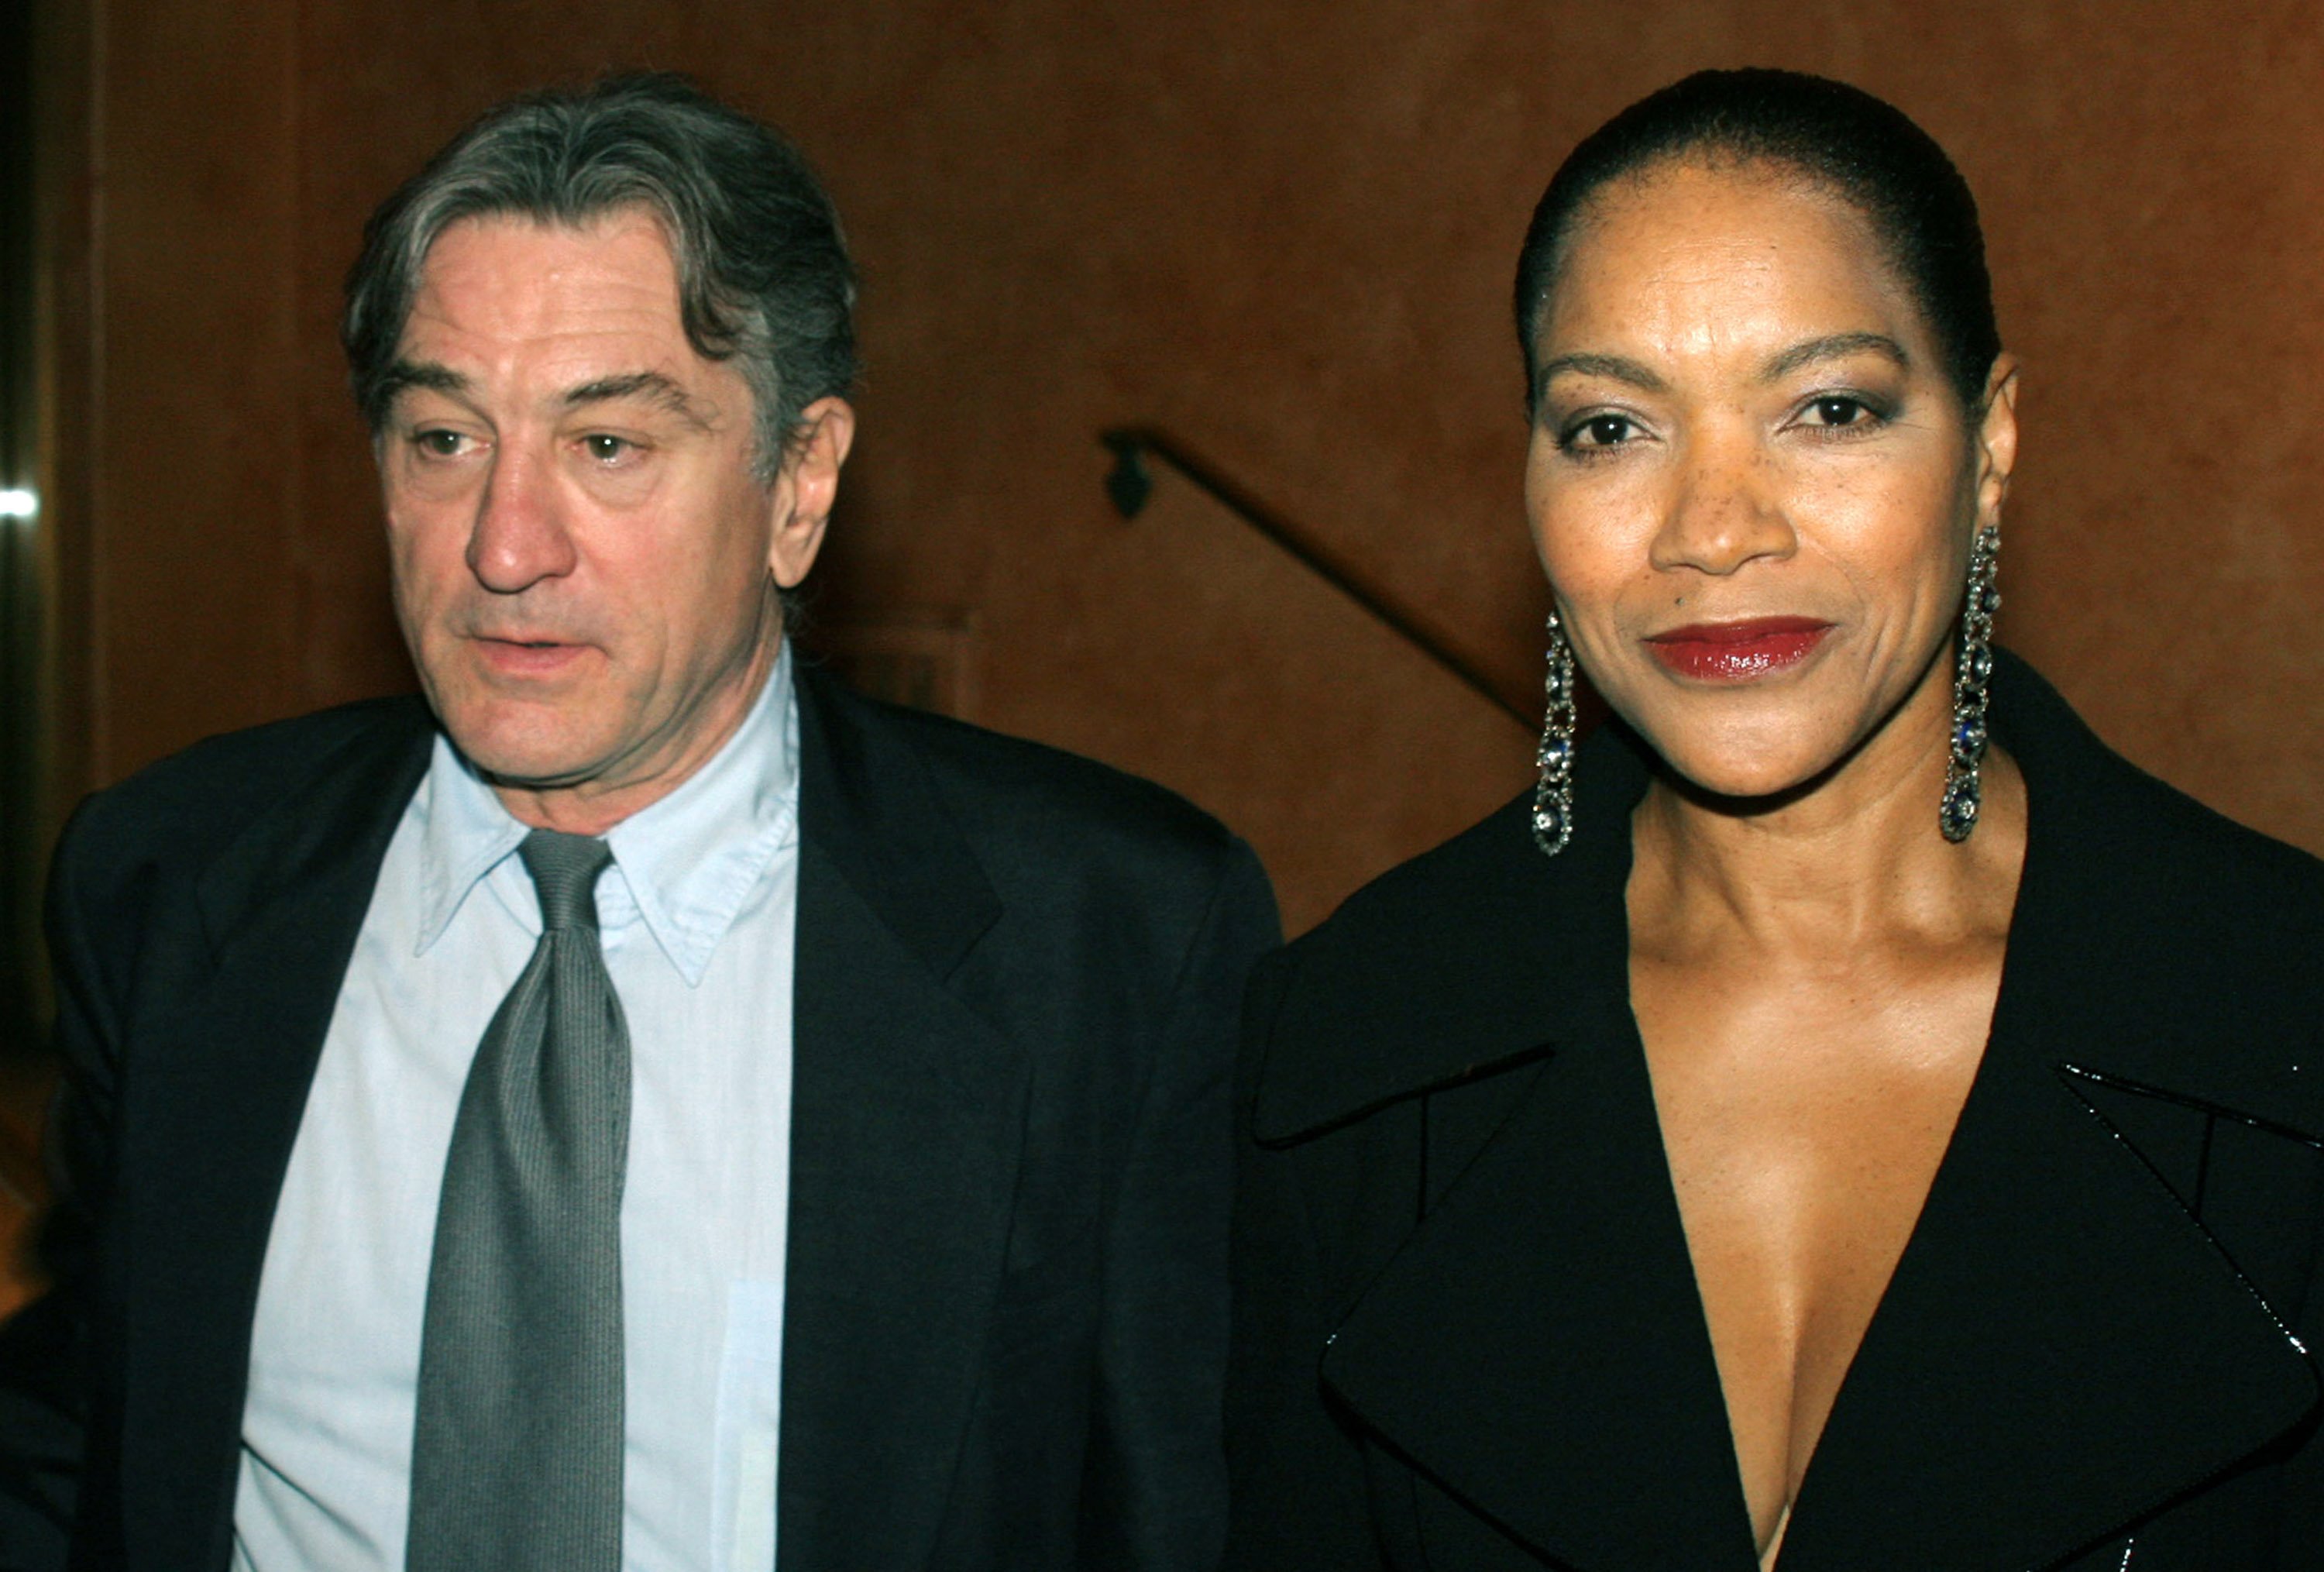 Producer Robert De Niro and Grace Hightower during "Jersey Boys" Broadway Opening Night at The August Wilson Theater in New York City, New York. / Source: Getty Images